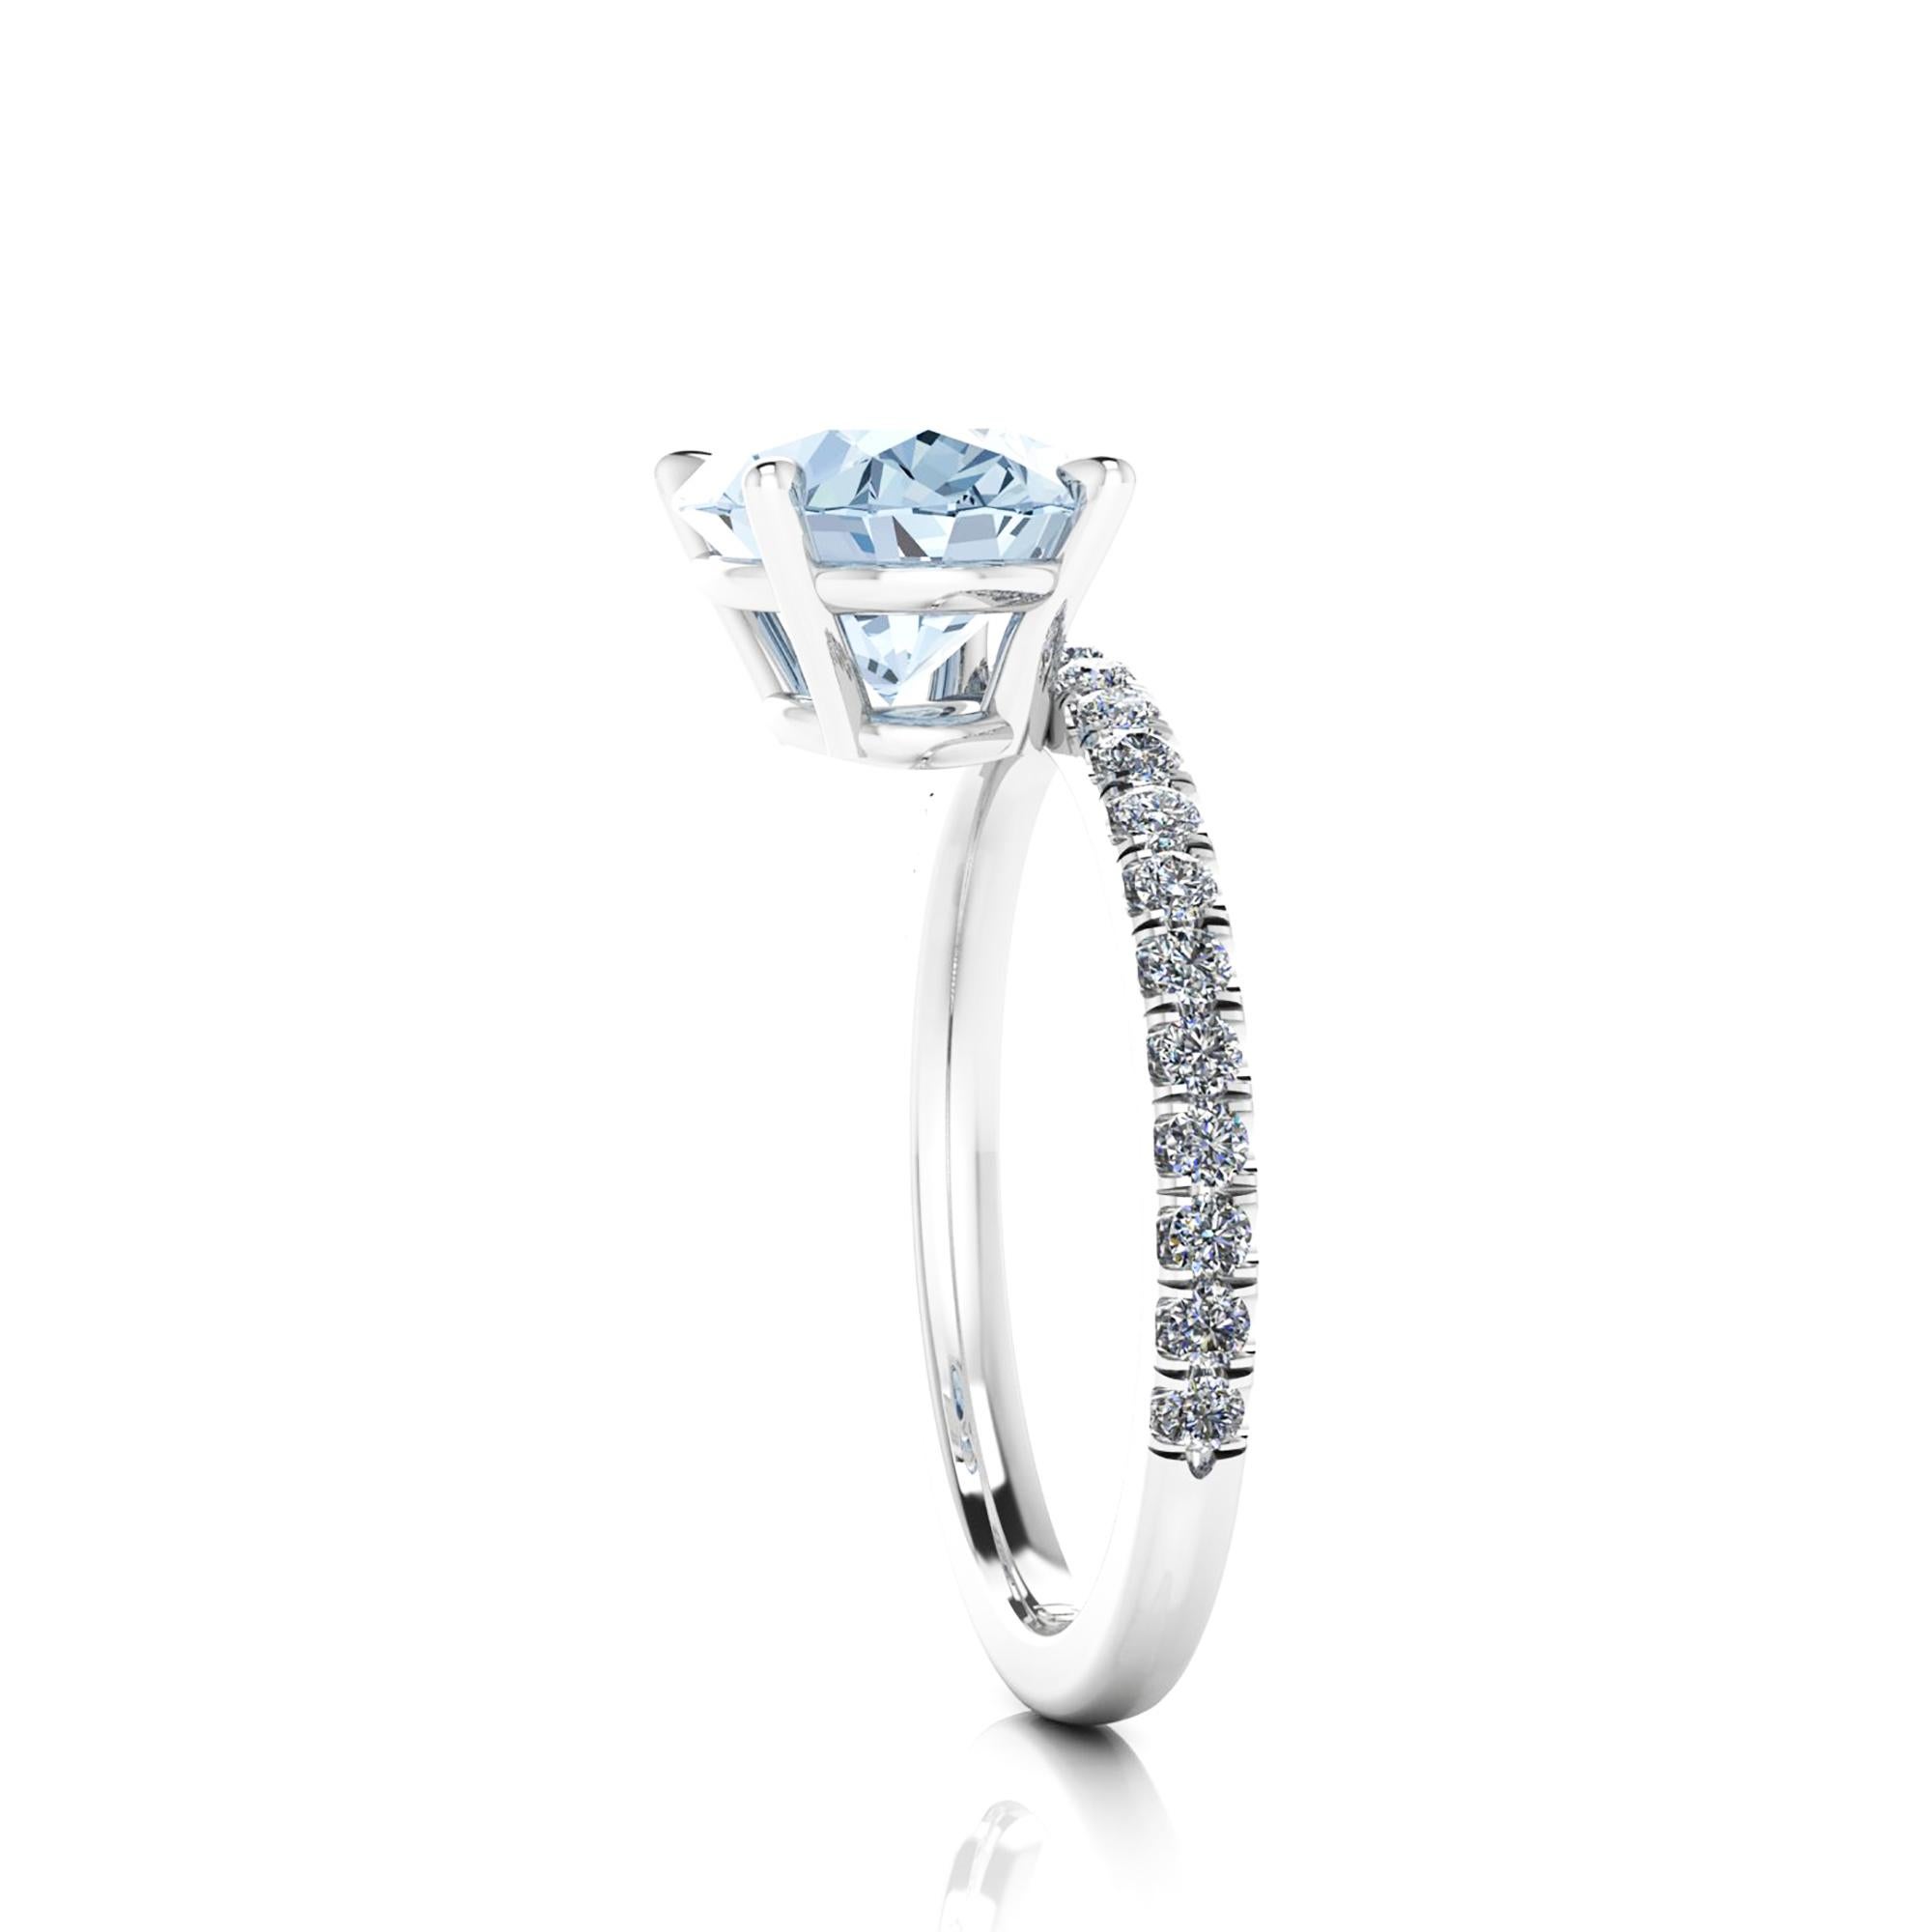 A  2.22 carat horizontal, set east to west Oval blue Aquamarine, set on a Platinum 950 ring, designed and hand made in New York 
adorned by white round diamonds, hand set, for an approximate 0.60 carats, for a maximum shine and sparkle.

This ring's